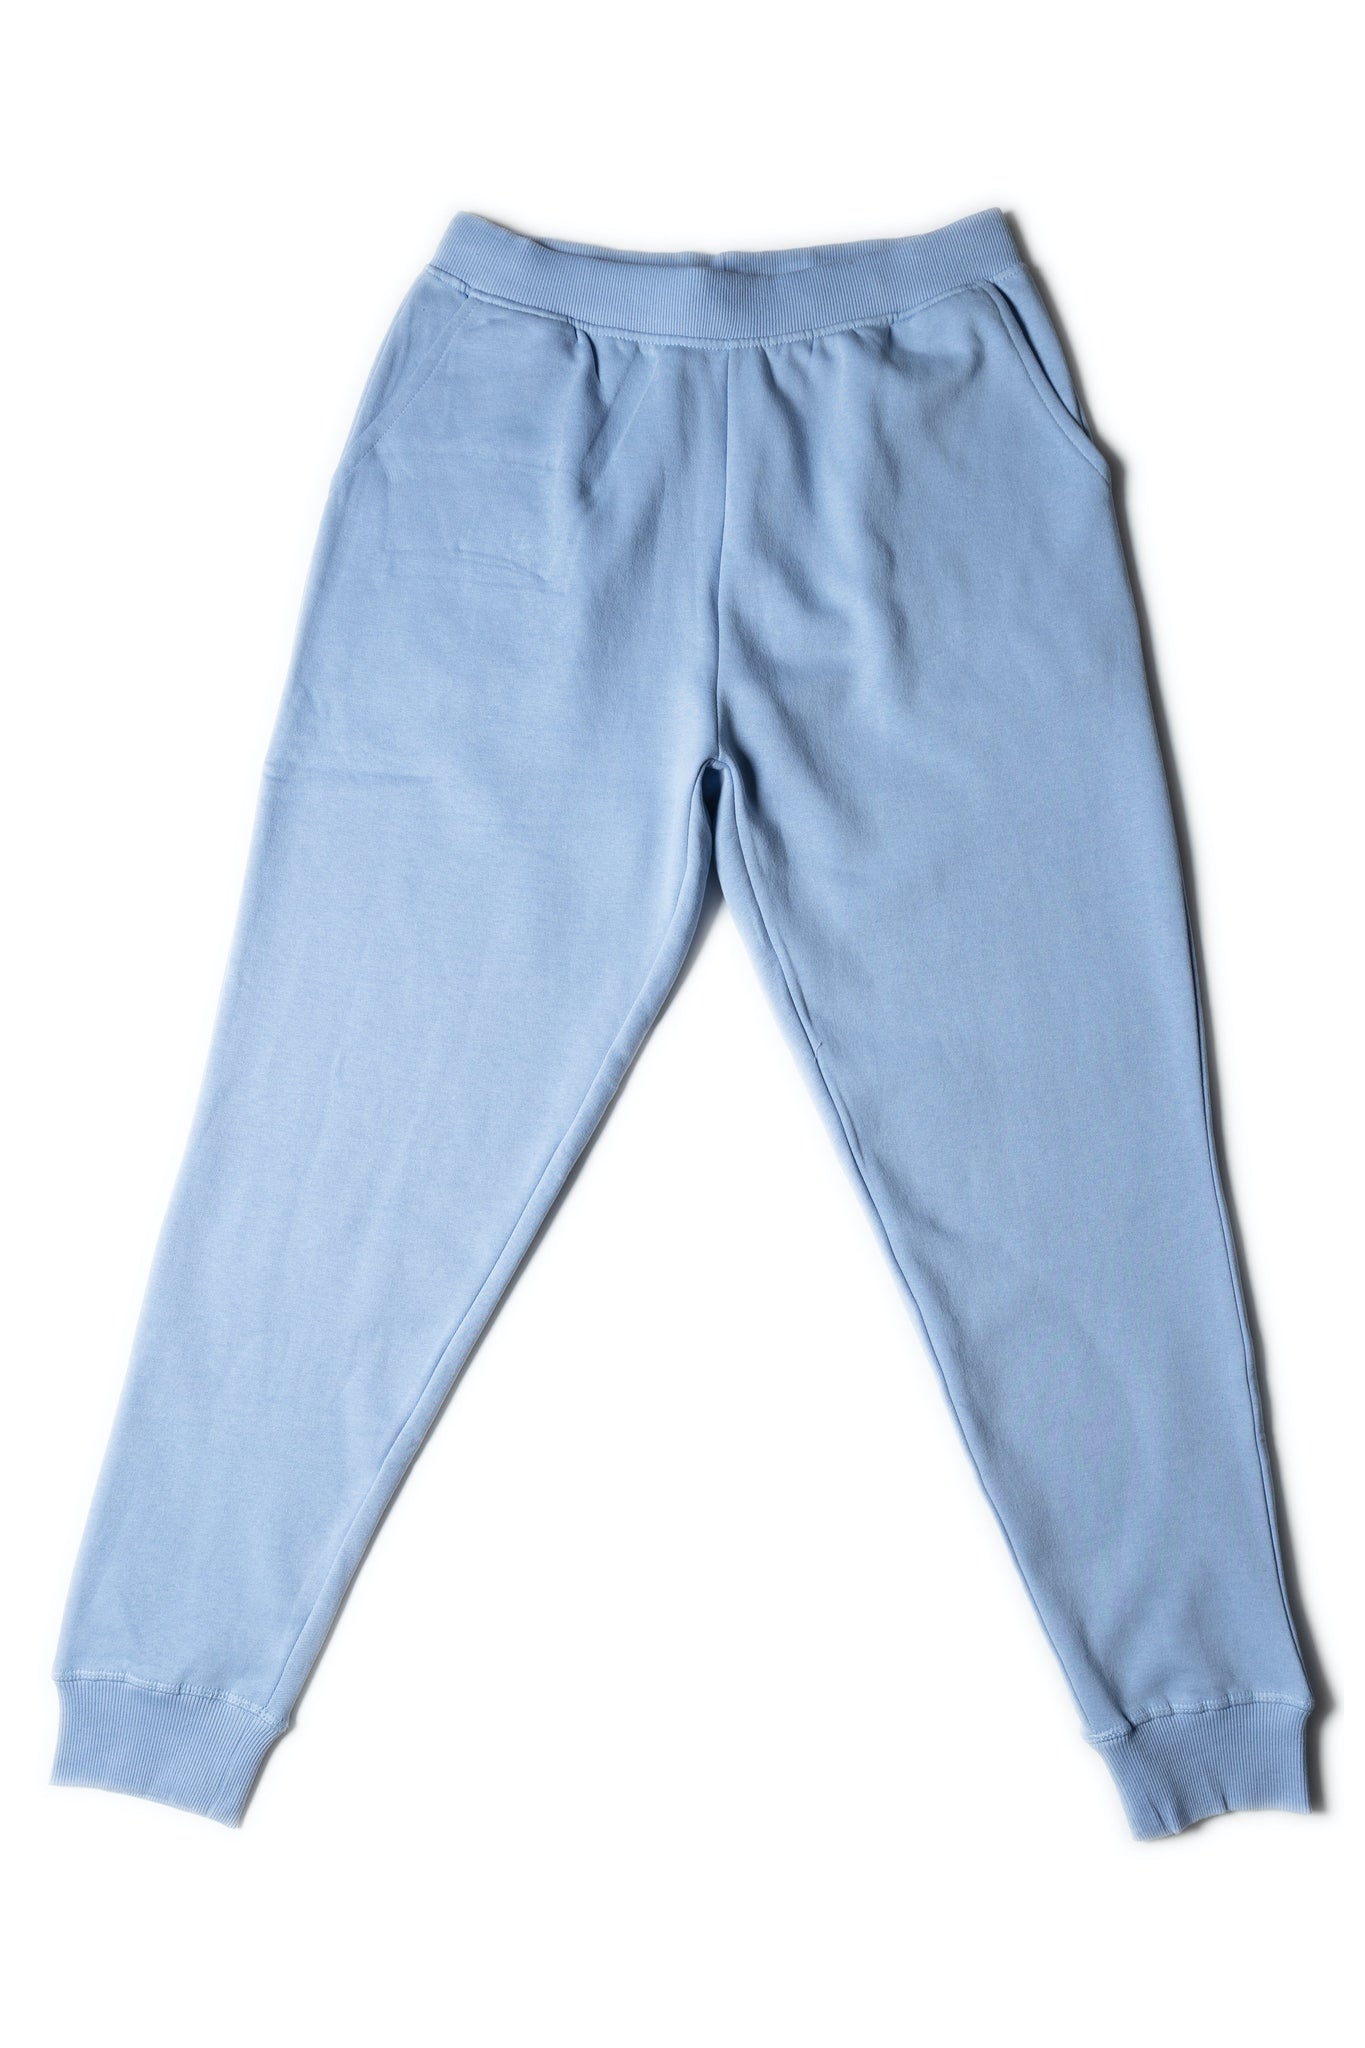 HERO - 5020R Unisex Joggers - Sky Blue (Relaxed Fit)